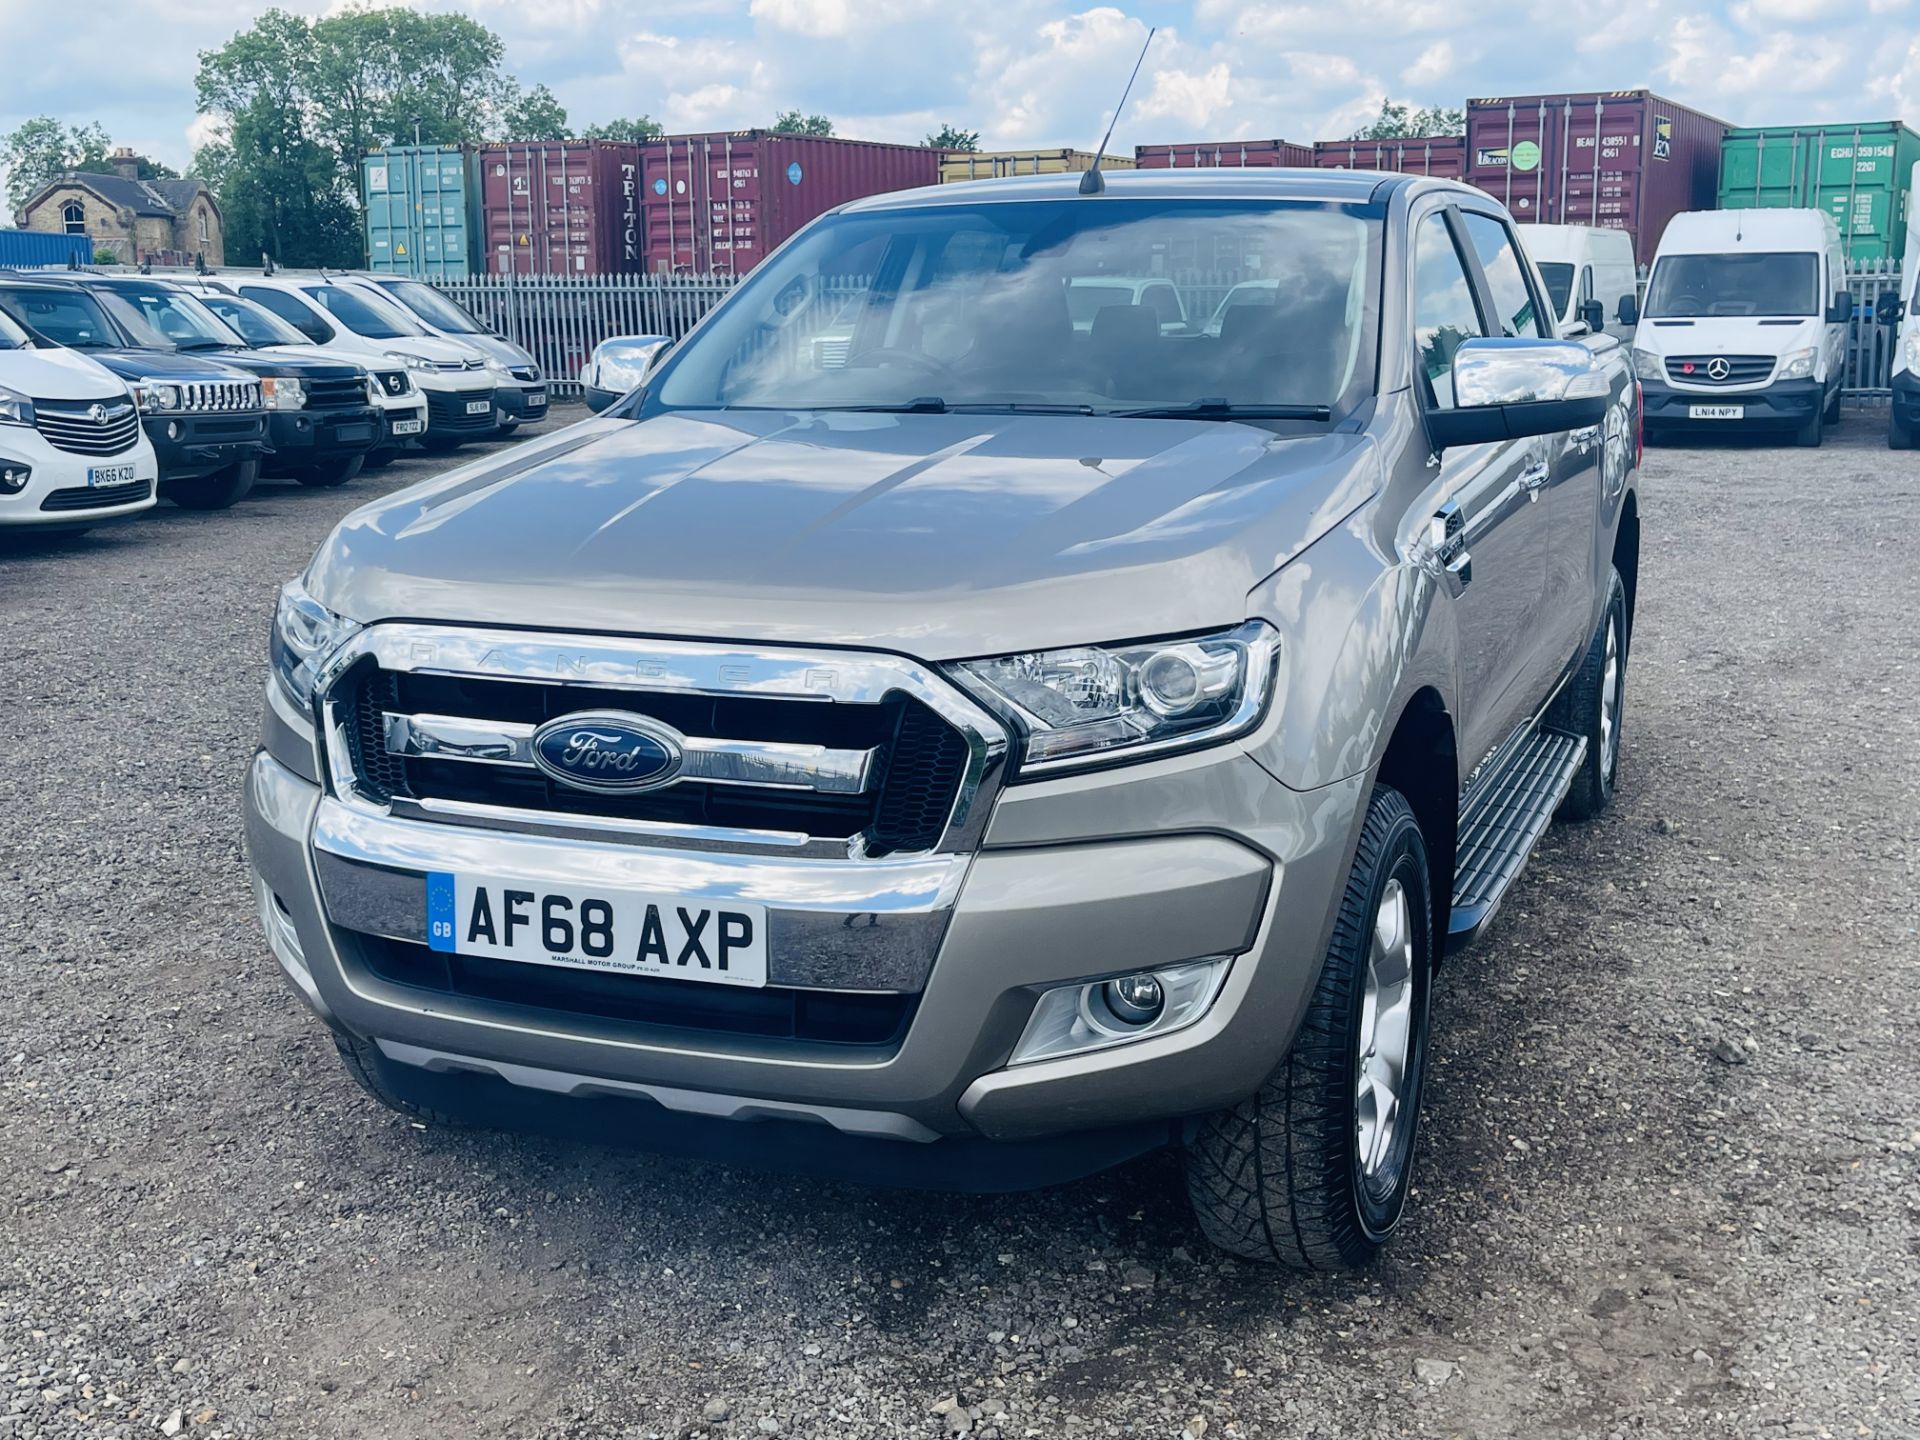 ** ON SALE ** Ford Ranger 3.2 TDCI Limited 2018 '68 Reg' Auto 4WD - Sat Nav - A/C - Euro 6 - Image 5 of 35